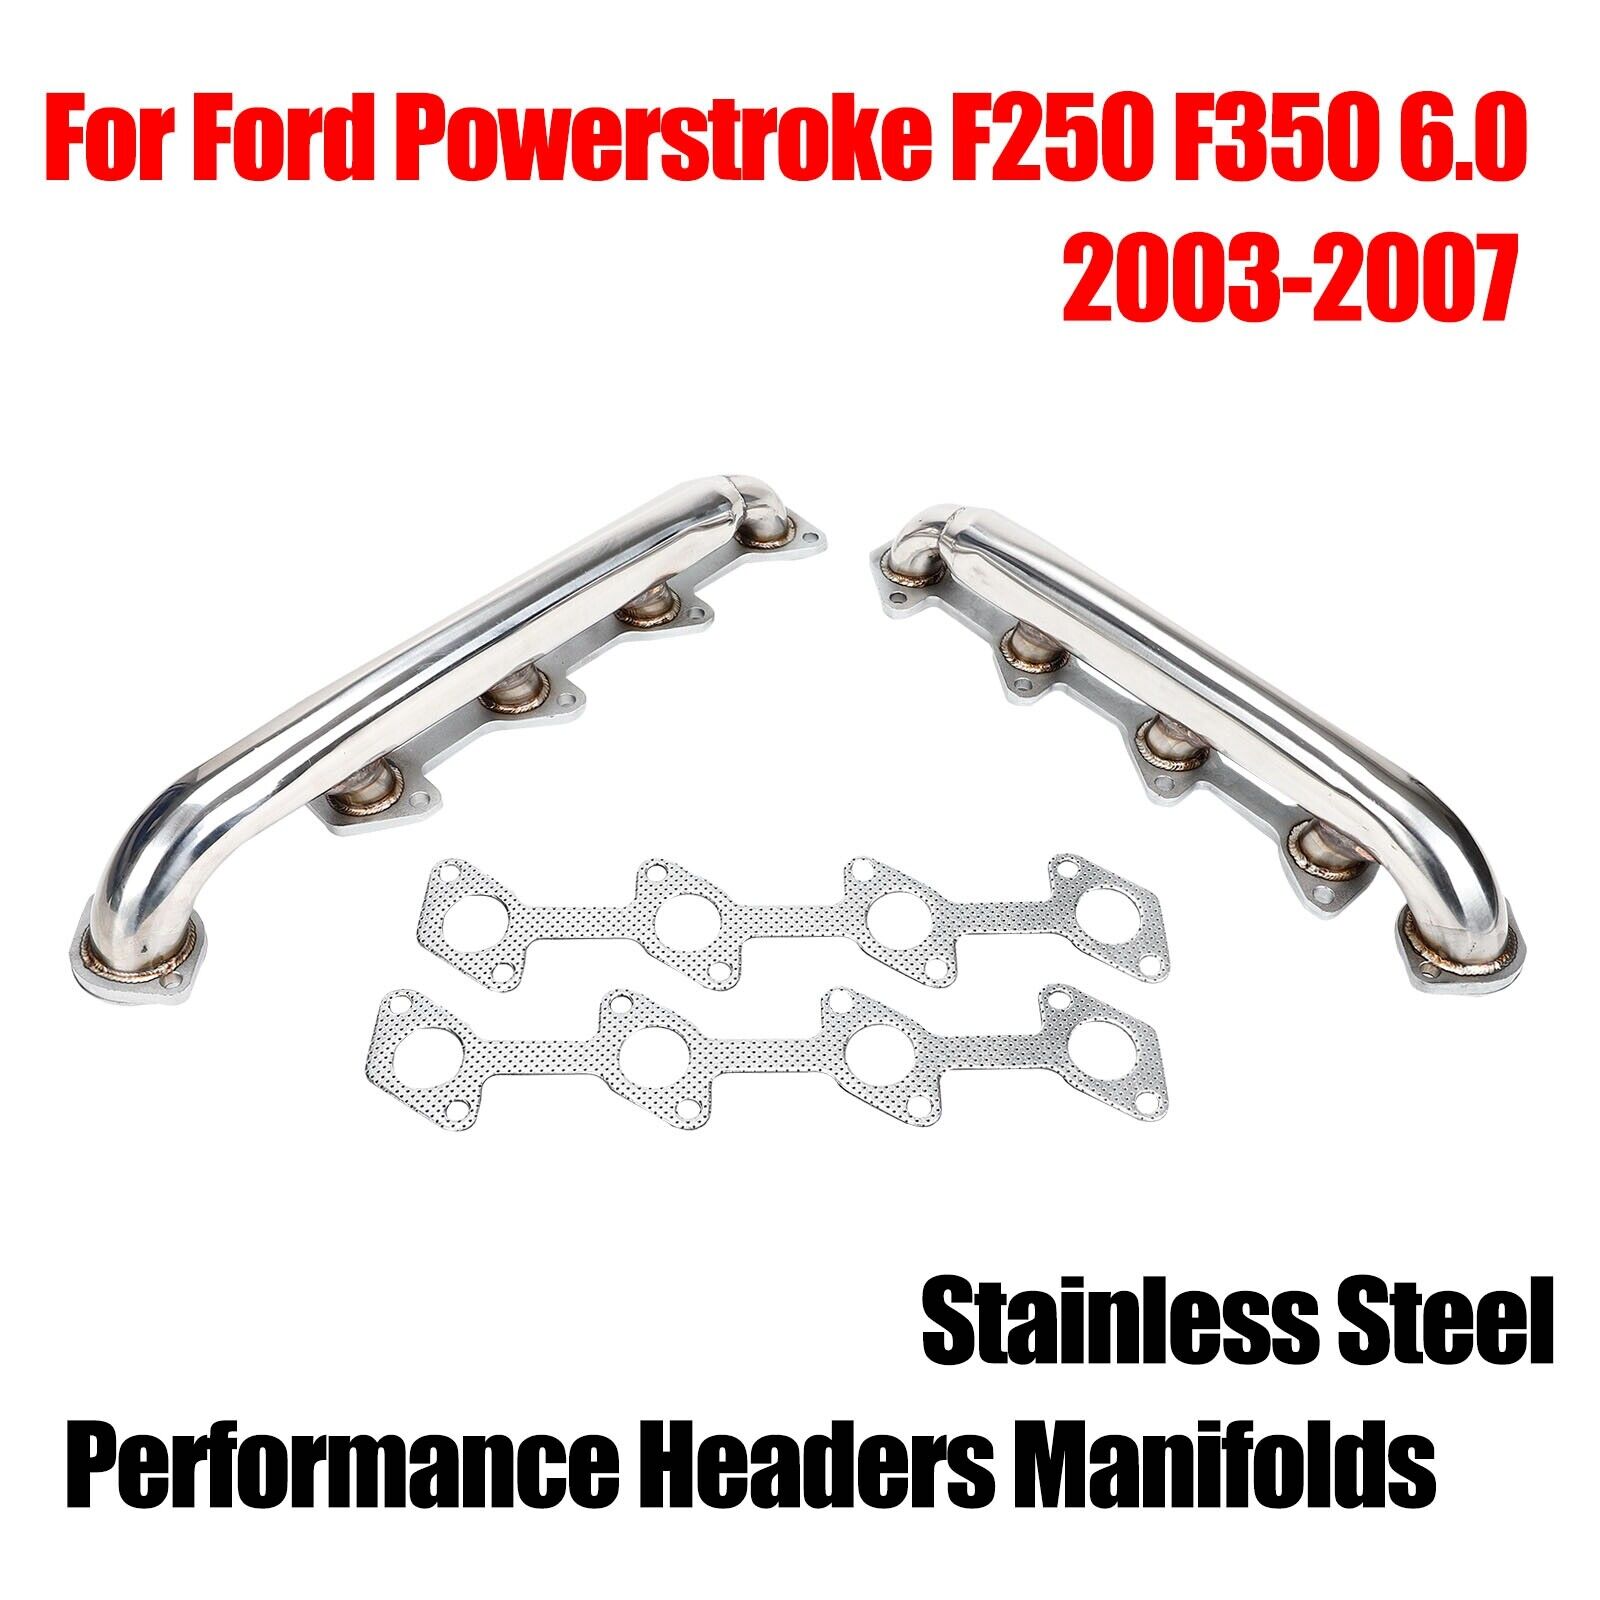 Stainless Steel Headers Manifolds For 2003-2007 Ford Powerstroke F250 F350 6.0